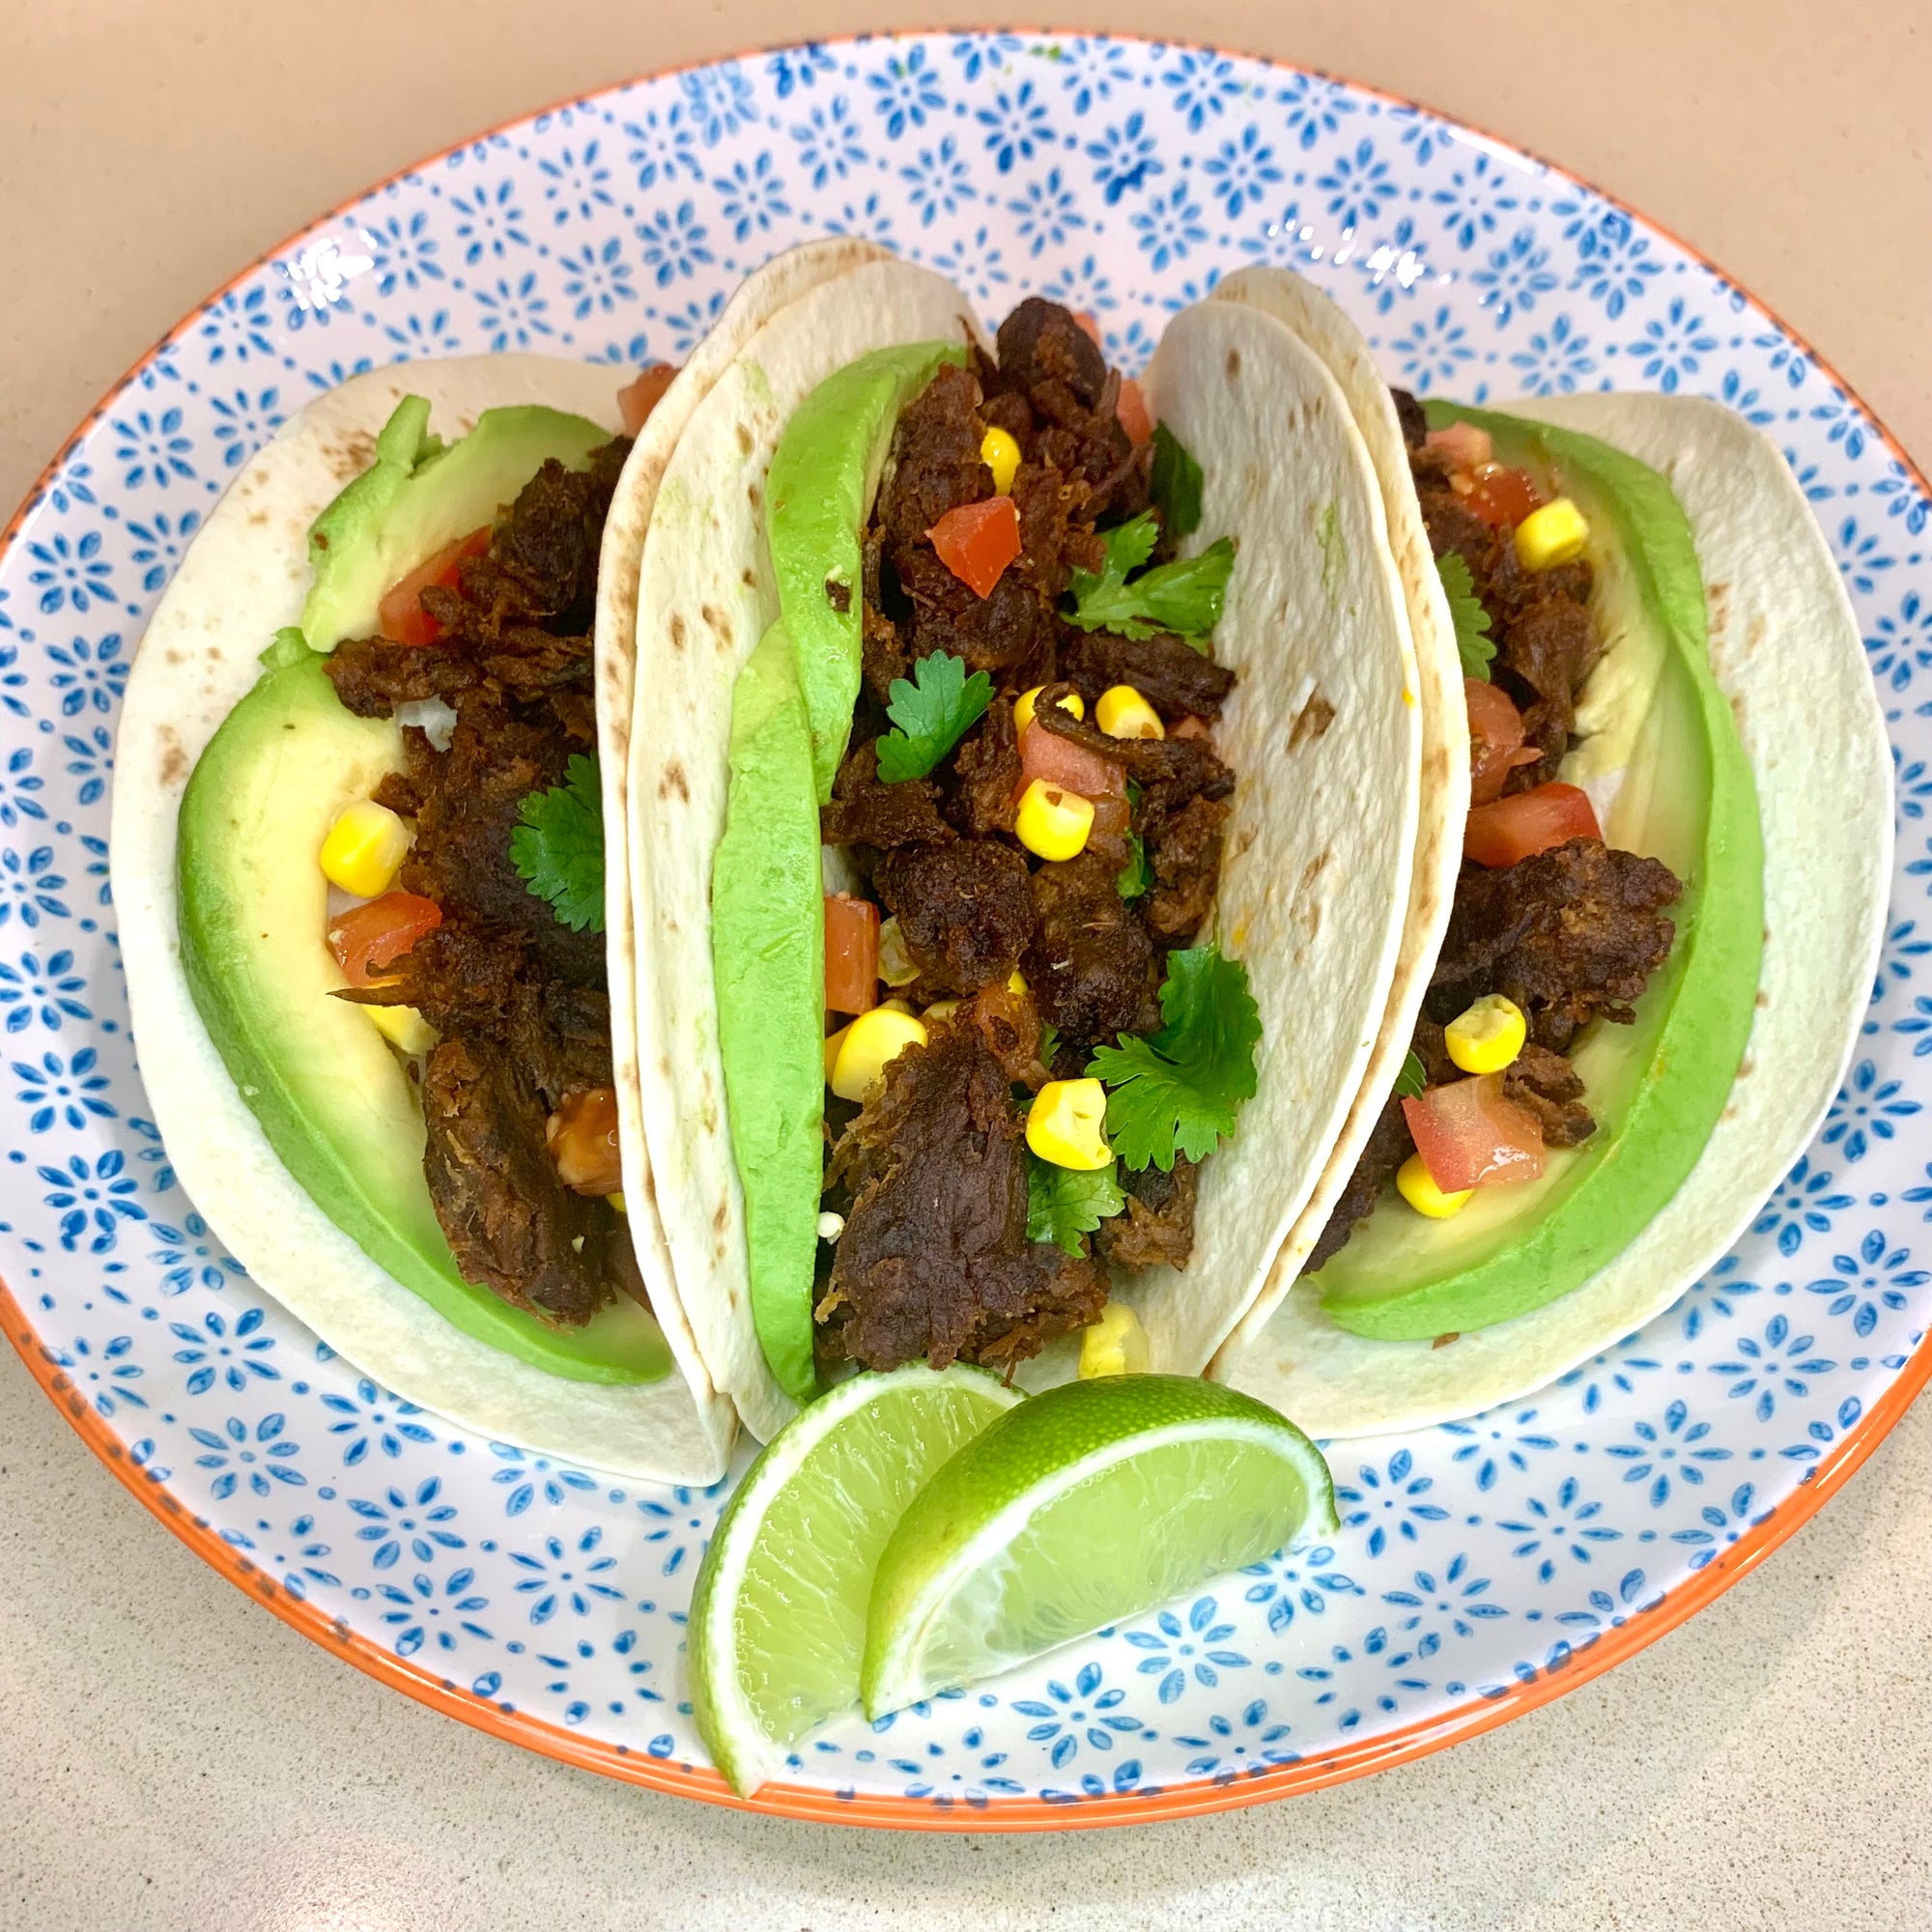 10 minute Tacos with Smoked Pulled Mushroom Bites (Plant-Based)